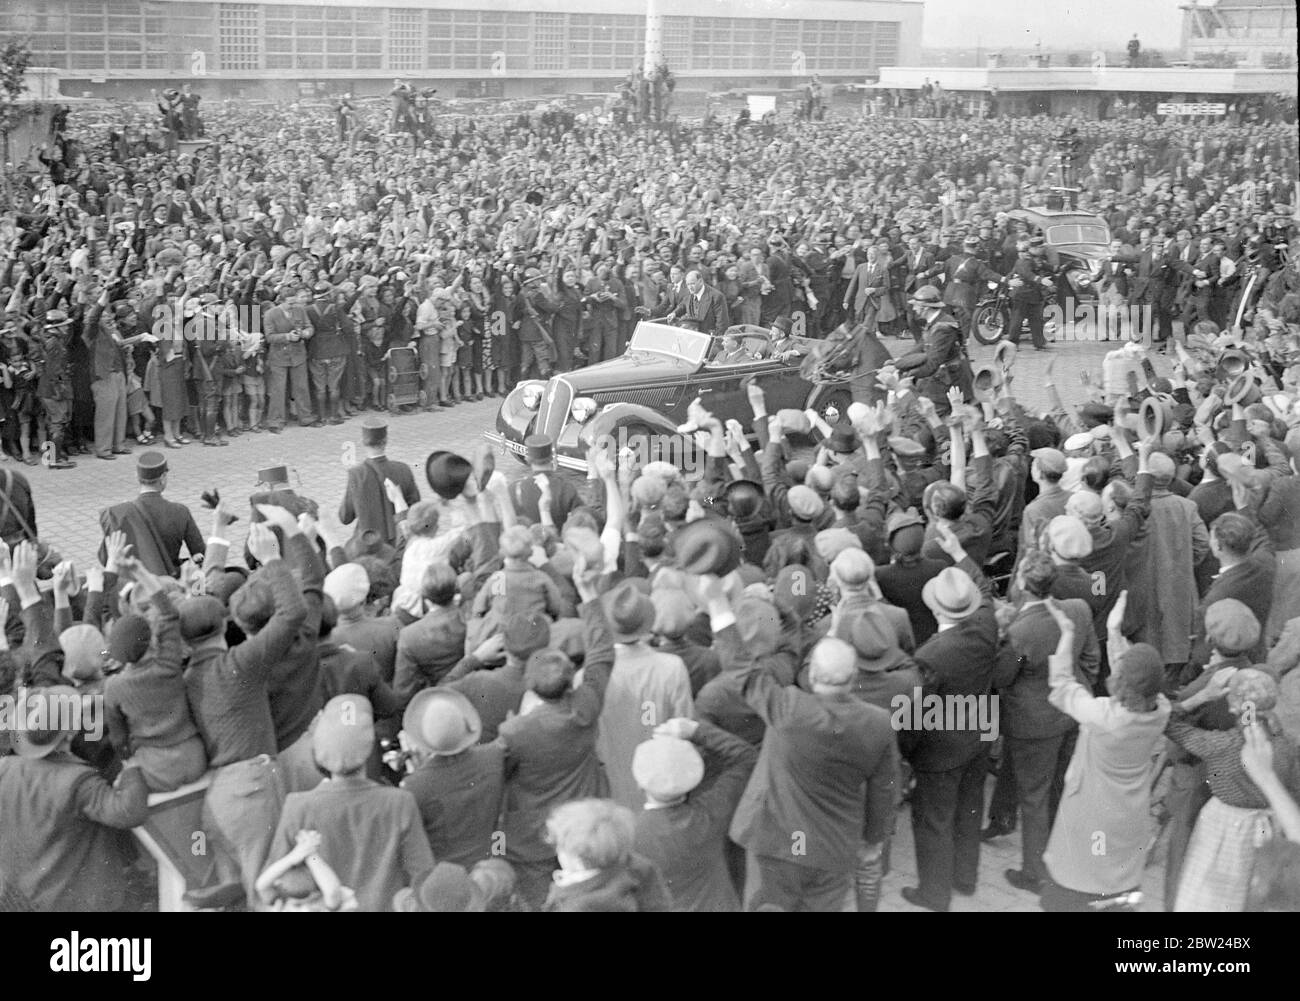 Edouard Daladier, welcomed by relieved thousands in Paris. Sharing a common relief with the other peoples of Europe at the prospect of peace, thousands gathered at Le Bourget Aerodrome, Paris, to welcome M Edouard Daladier, French Premier home from Munich, where he took part in the four power conference on the Czech problem that ended in an agreement. 30 September 1938 Stock Photo